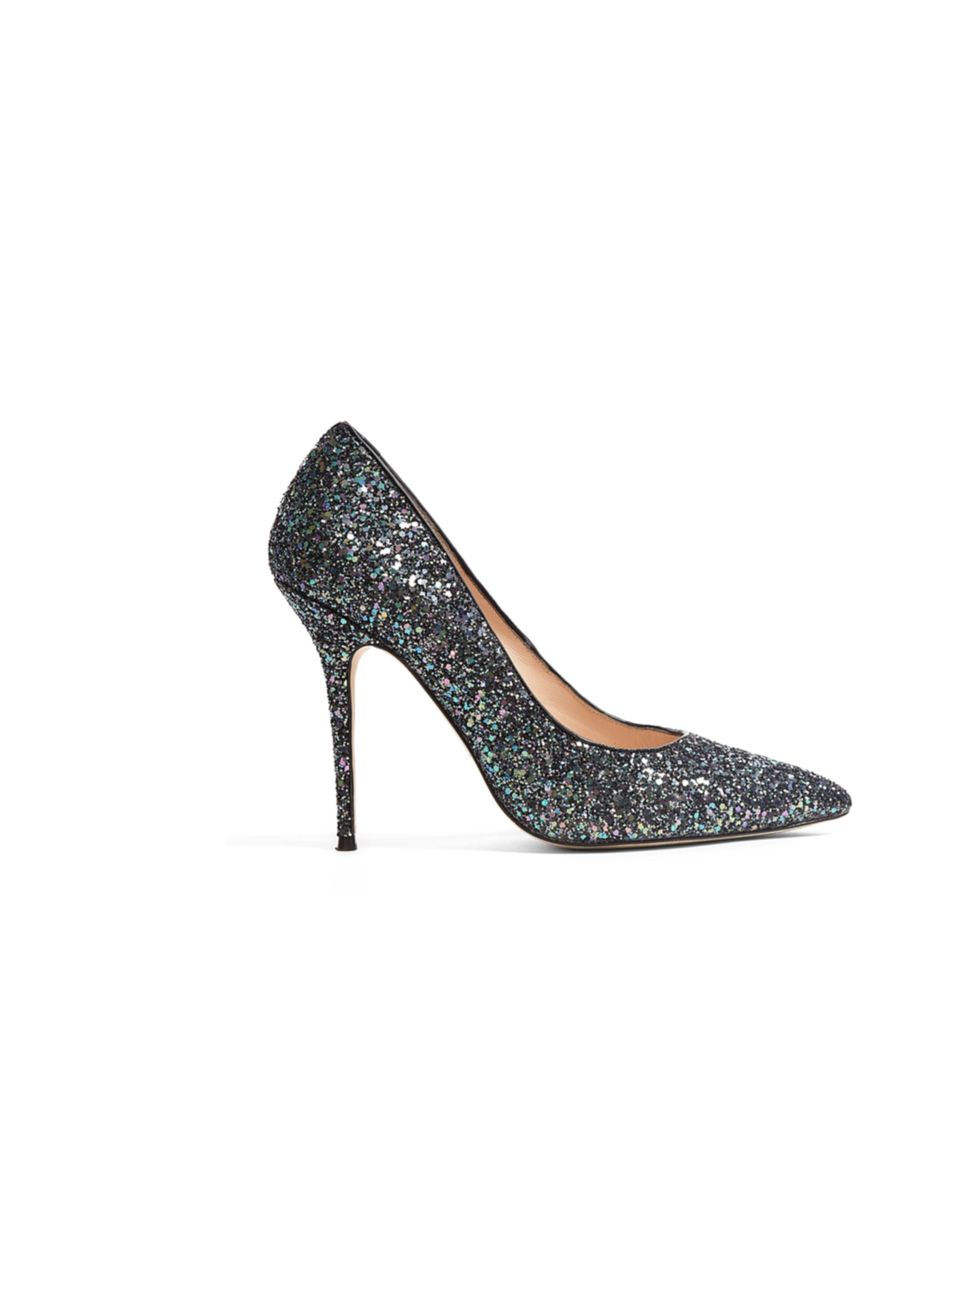 <p>The glittery, sparkly Dorothy shoe is everywhere right now, so make sure you check out My-Wardrobes latest signing Lucy Choi Lucy Choi glitter court shoes, £185, at My-Wardrobe</p><p><a href="http://shopping.elleuk.com/browse?fts=lucy+choi+glitter+co